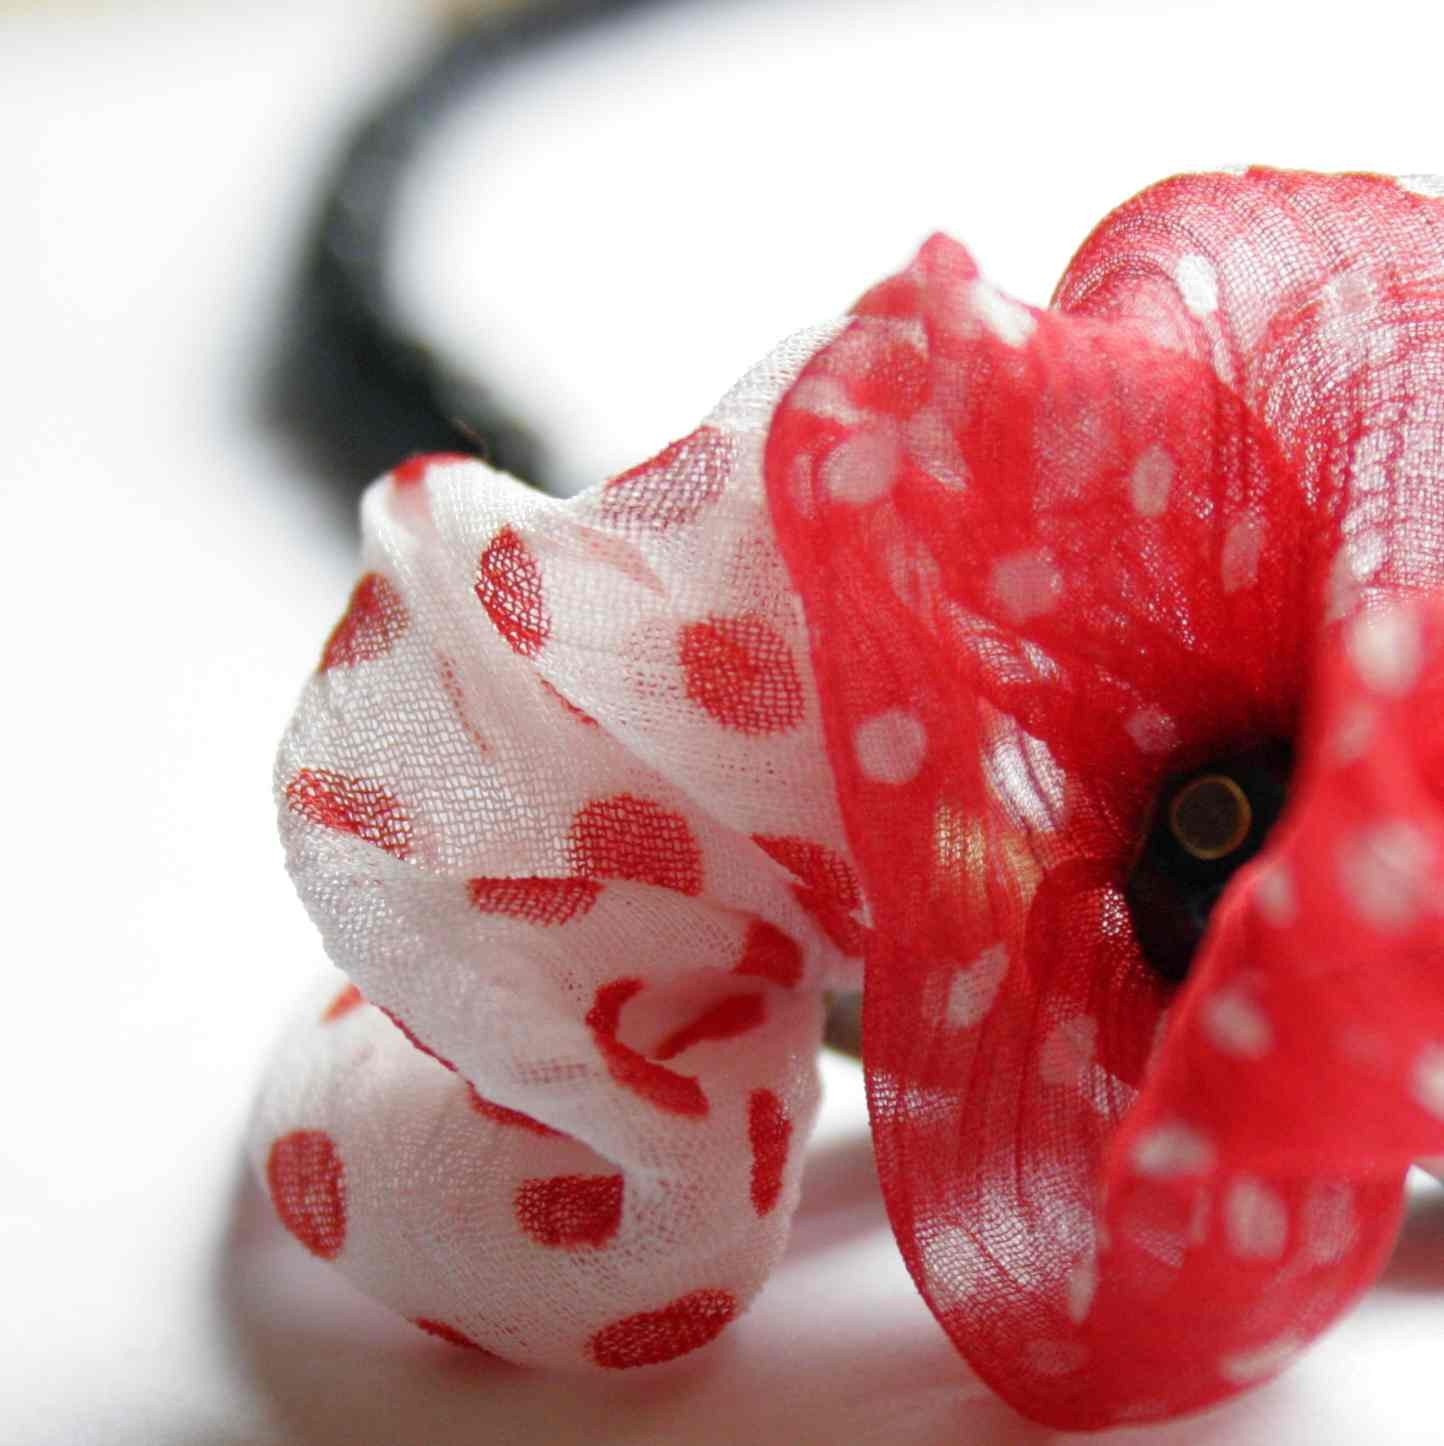 Poppy Girl - poppy flower necklace made of silk and faceted glass beads